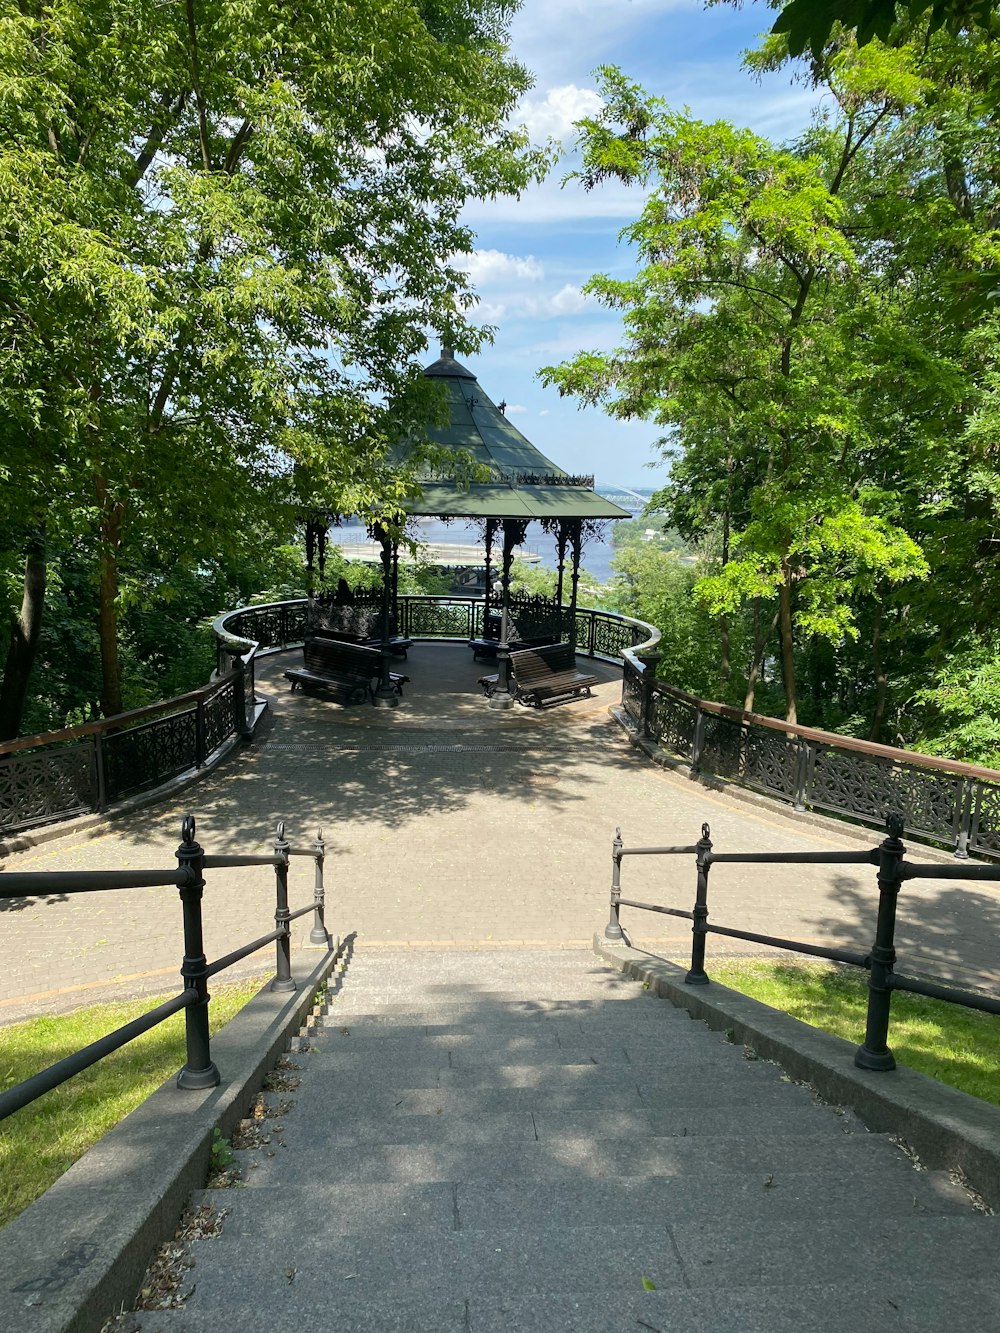 a walkway leading to a gazebo in a park